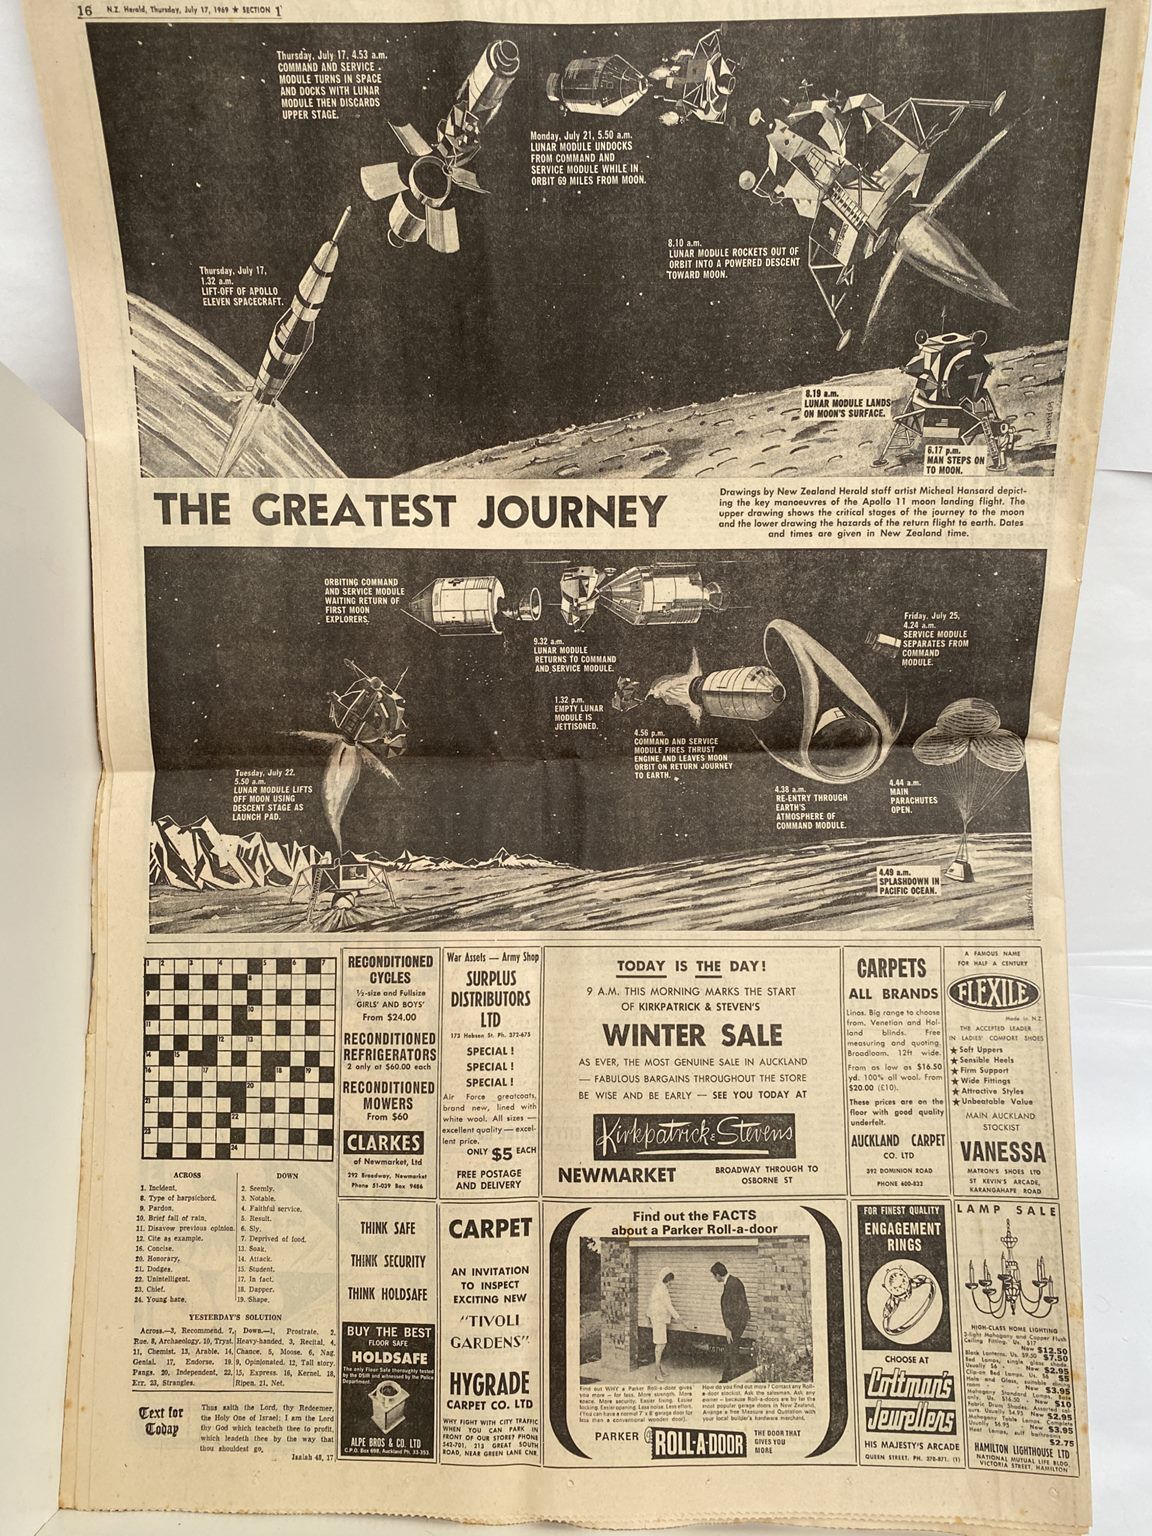 OLD NEWSPAPER: The New Zealand Herald, 17 July 1969 - Moon Landing Special